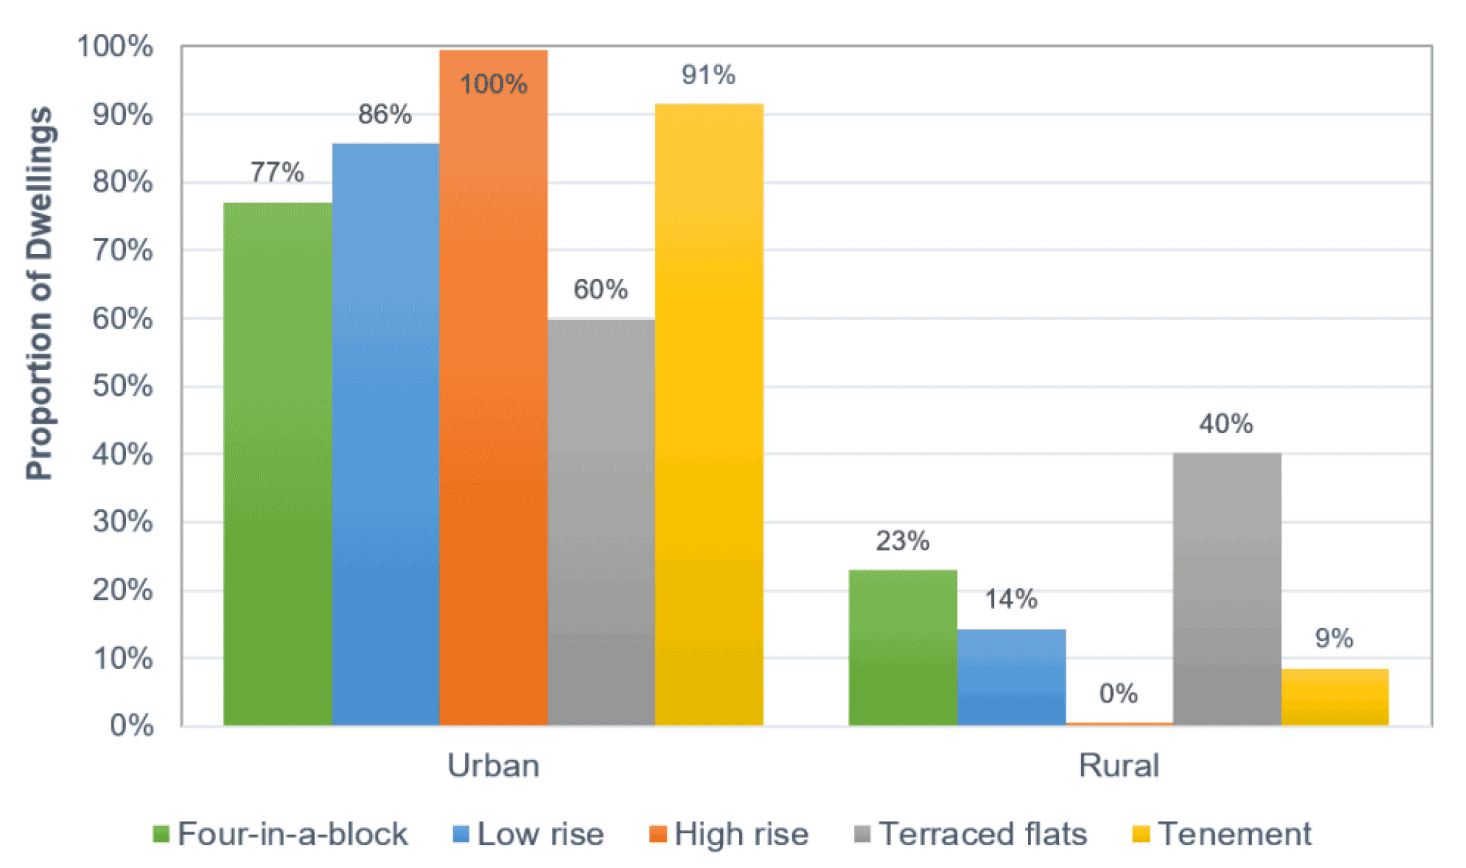 A histogram showing the number of different flatted archetypes in rural and urban areas.